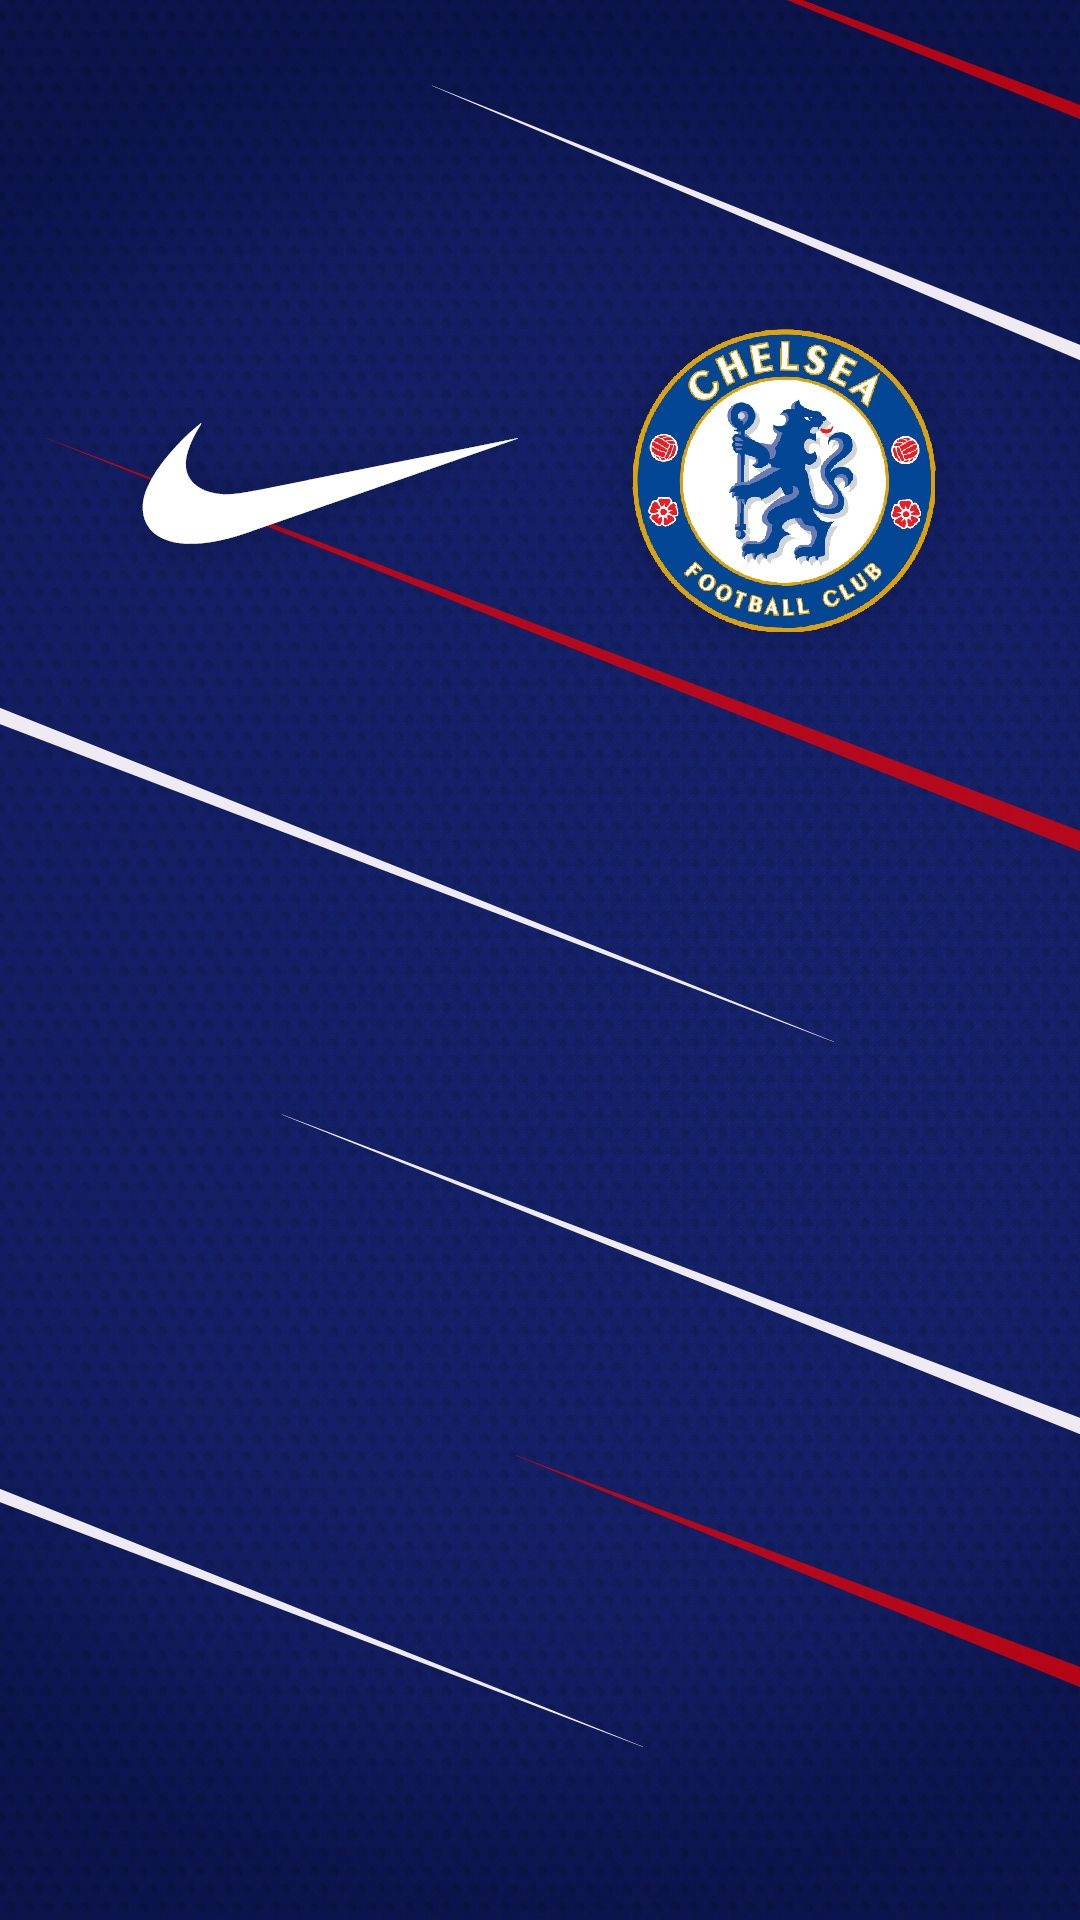 Chelsea: The first club to win all four major UEFA club competitions twice. 1080x1920 Full HD Wallpaper.